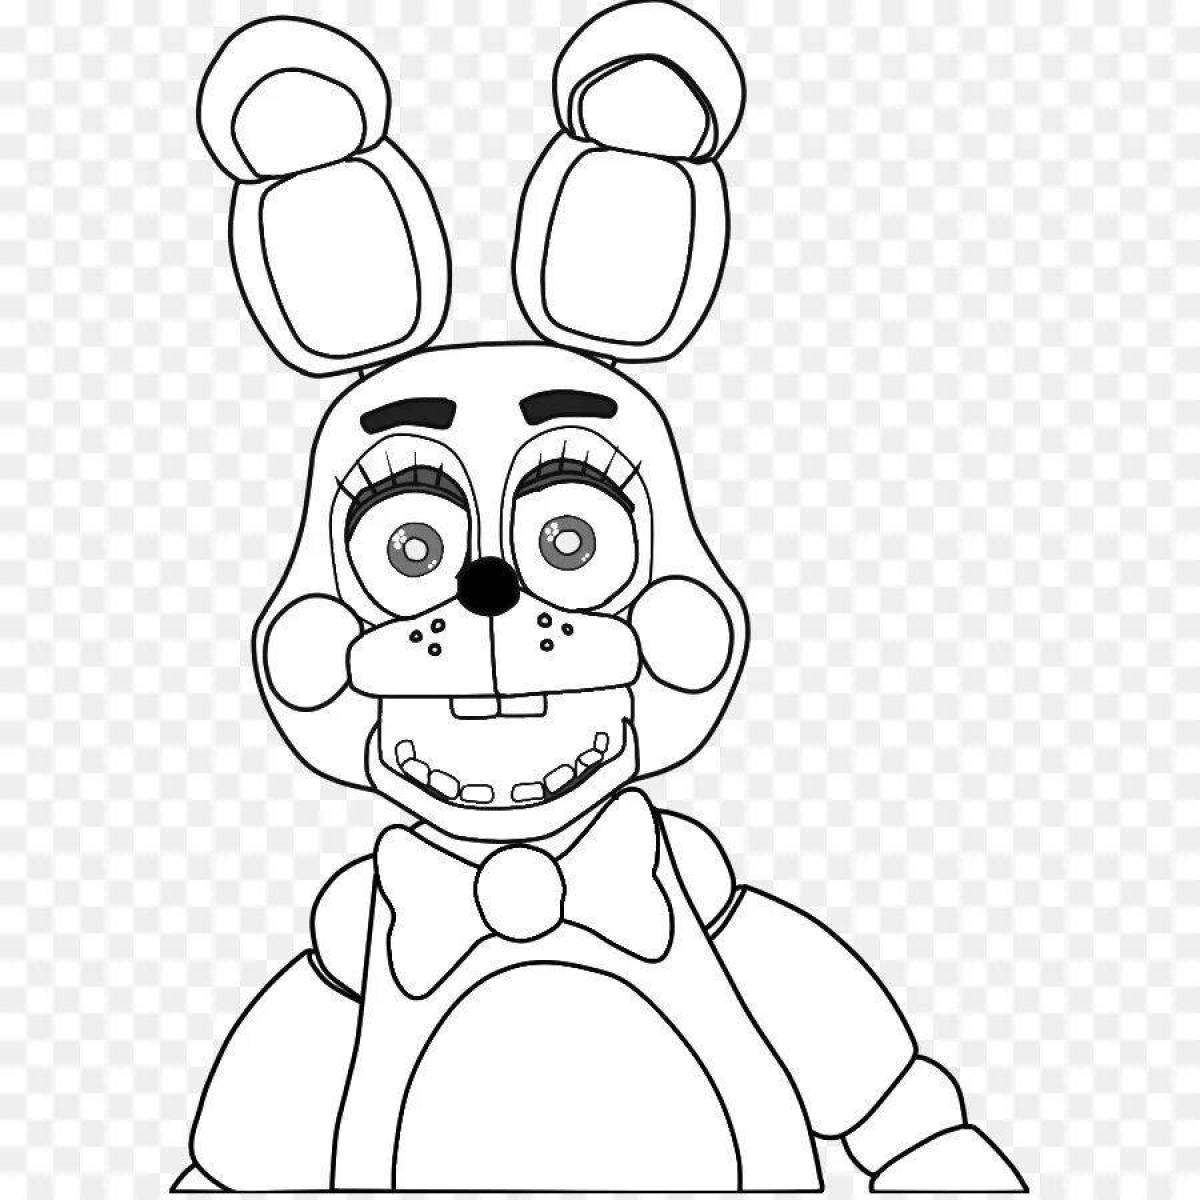 Bonnie color explosive from freddy coloring page